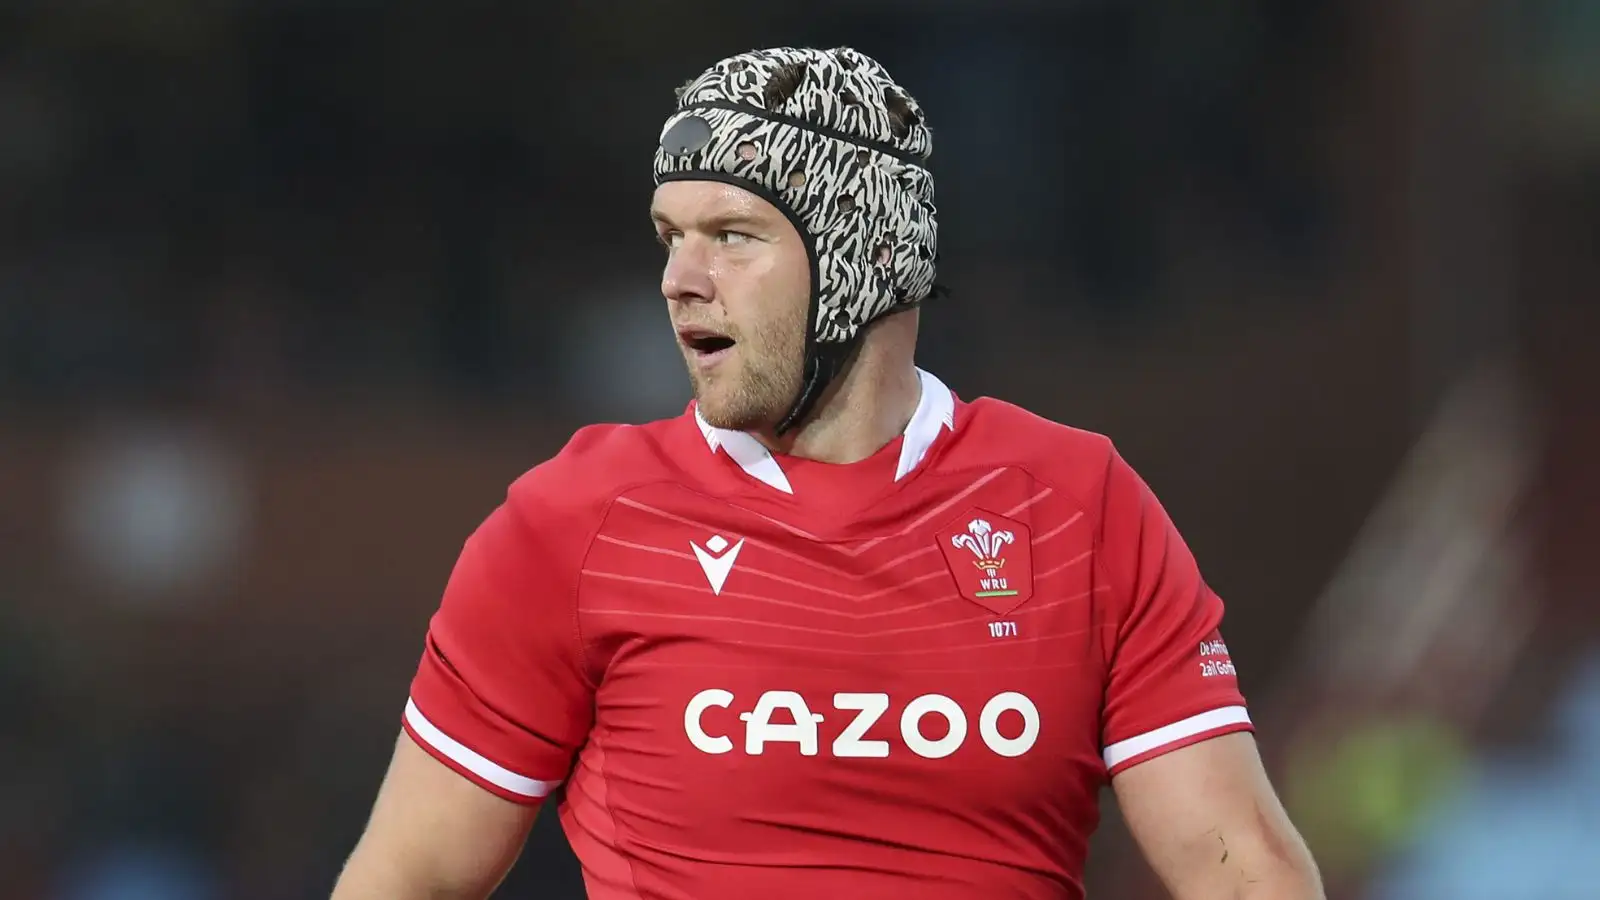 Wales flanker Dan Lydiate has secured a move back to his home region the Dragons ahead of the 2023/24 URC season following his release from the Ospreys.